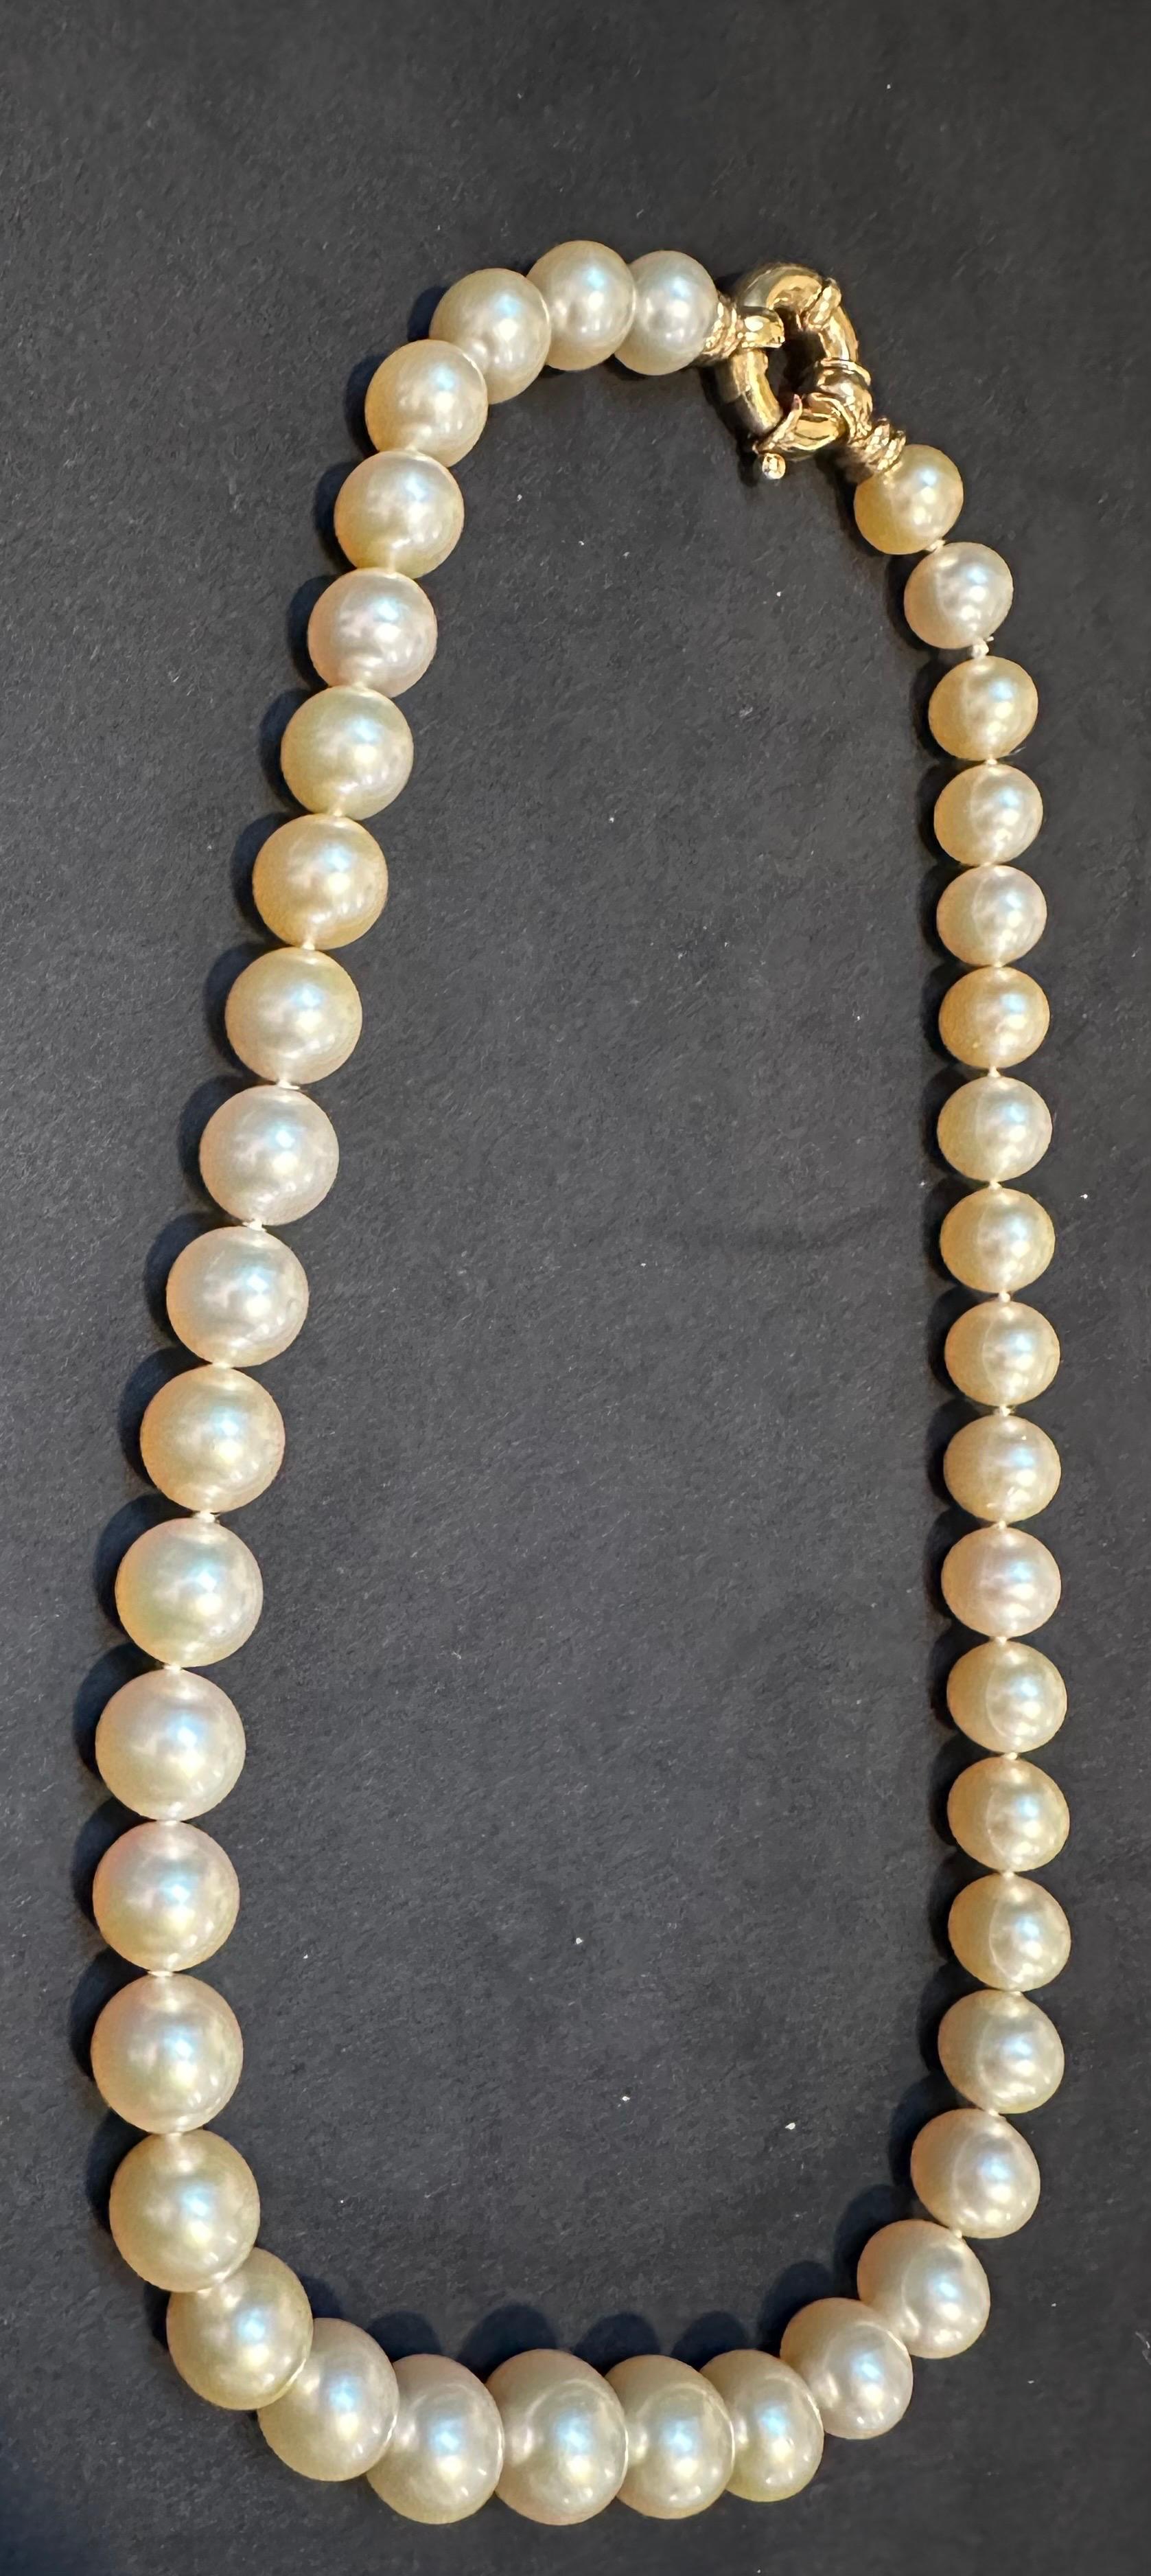 Women's Golden South Sea Pearls 10-12 MM Strand Necklace 18 Kt Gold  Clasp 18